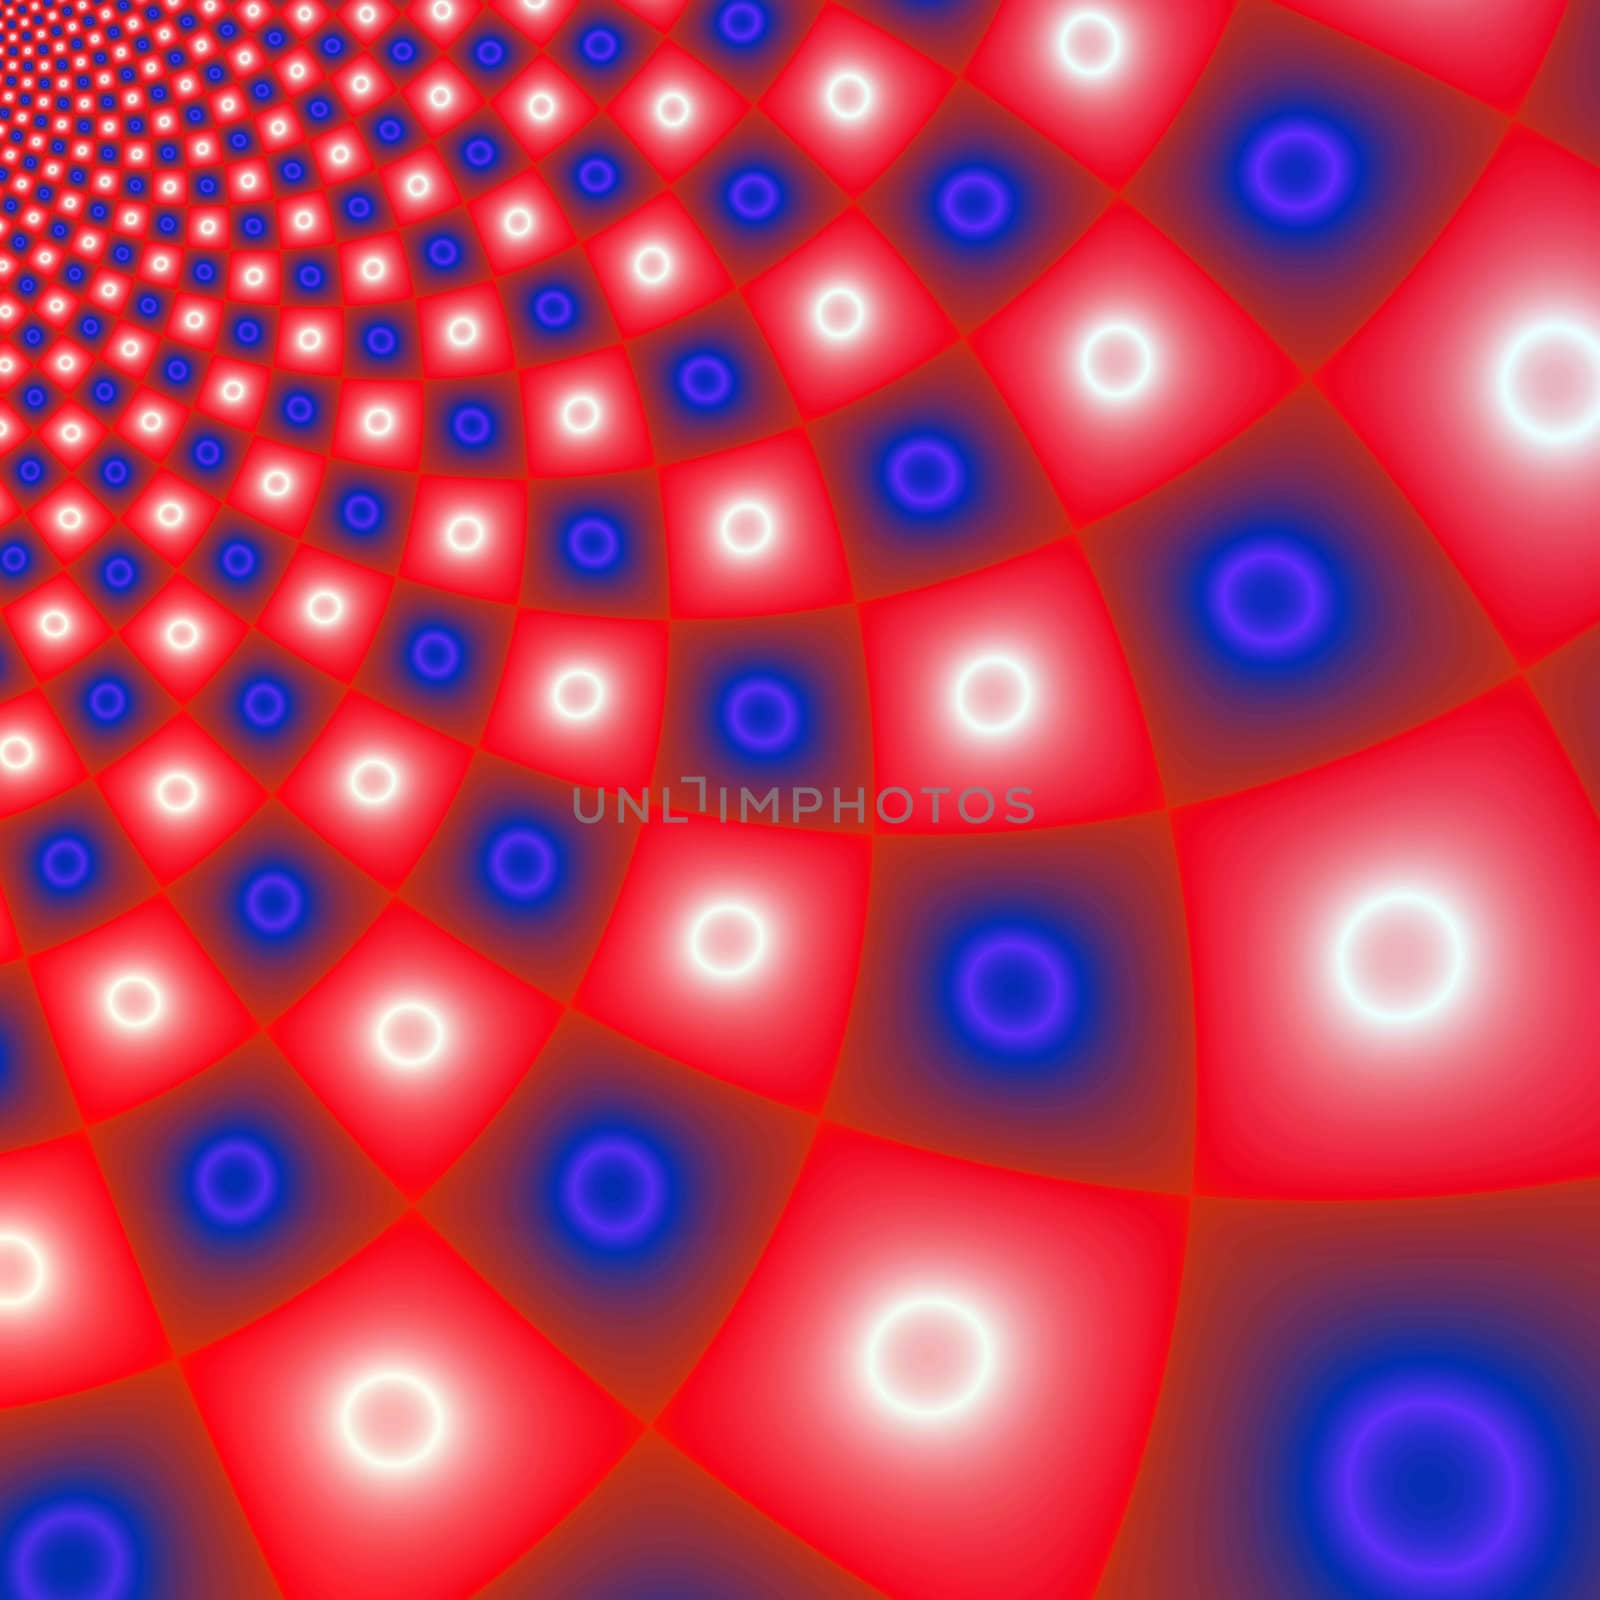 Abstract red and blue rendered fractal background